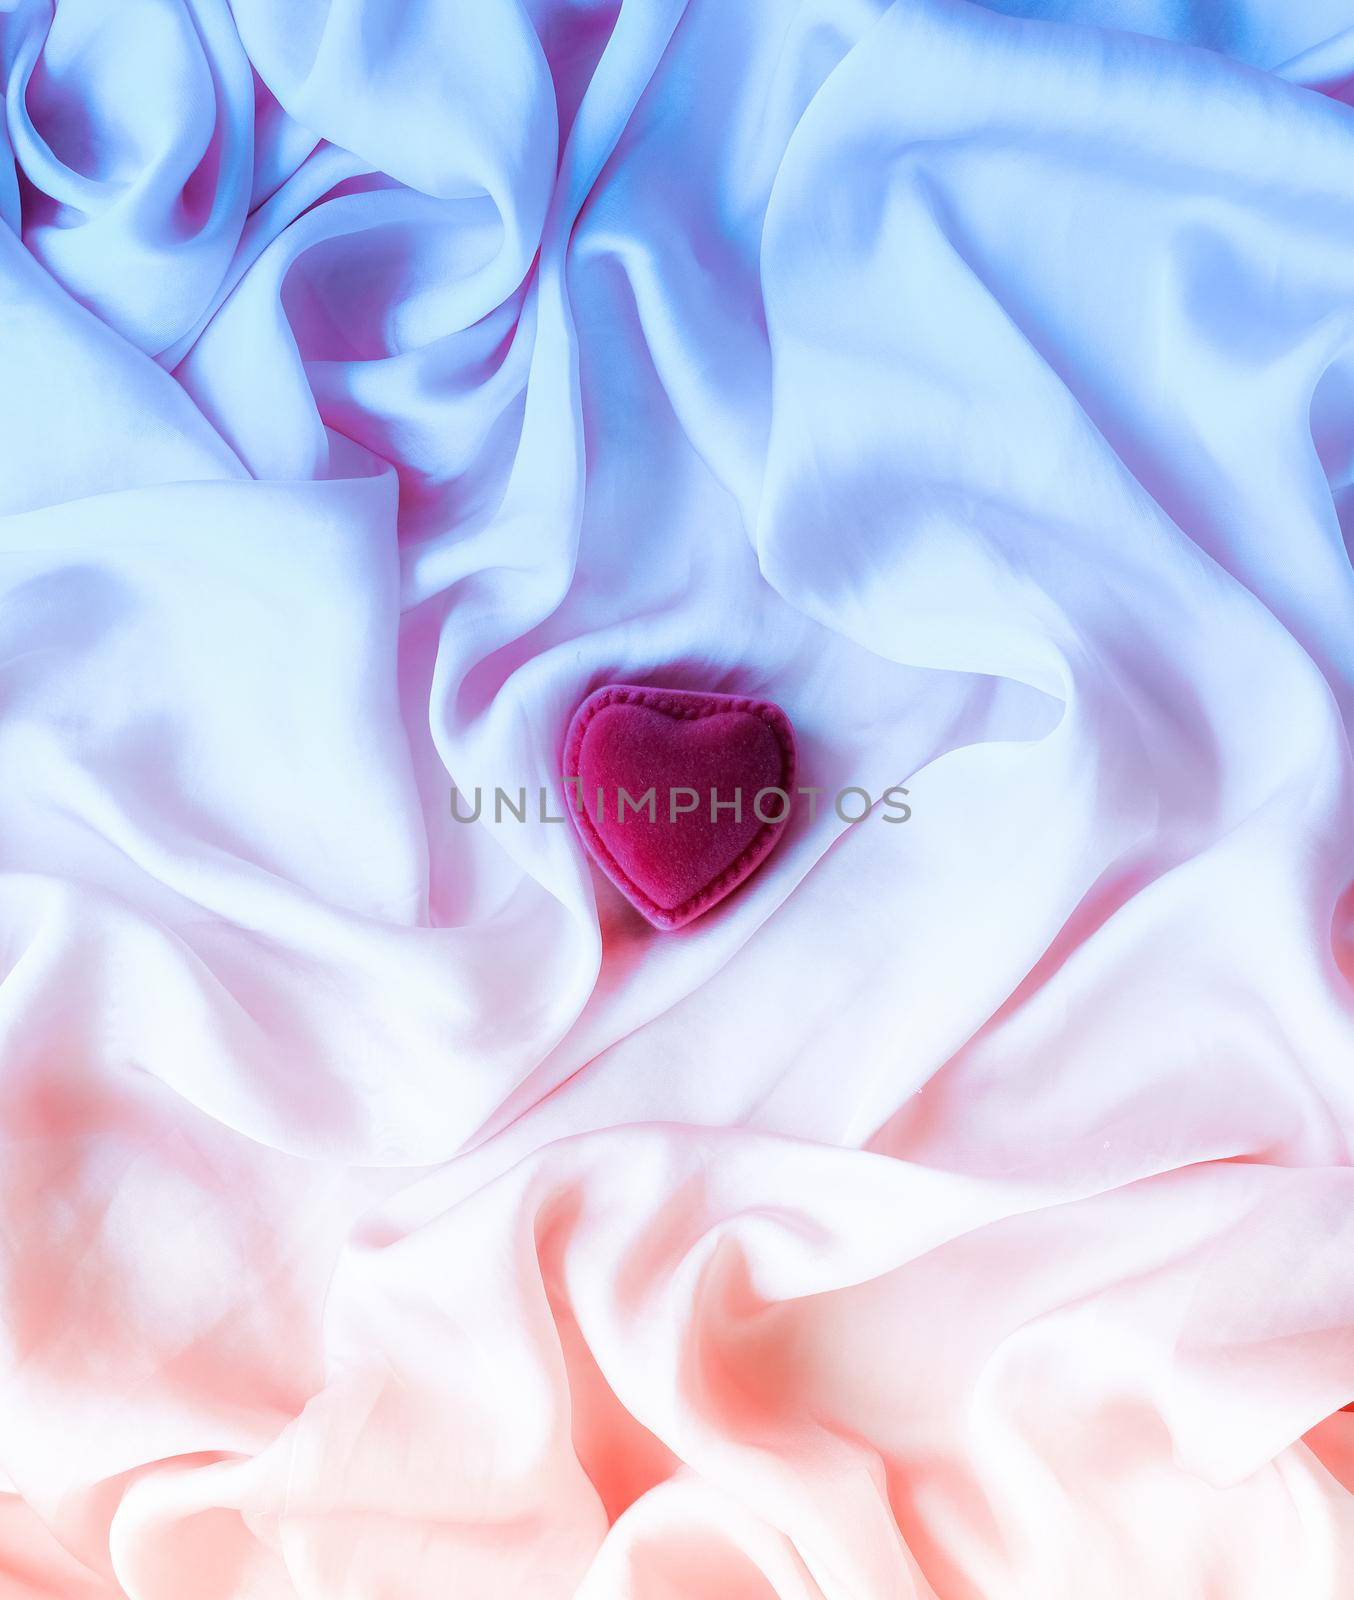 Valentine's day, true love, engagement and proposal concept - Heart-shaped gift box on neon silk. Will you be my Valentine?